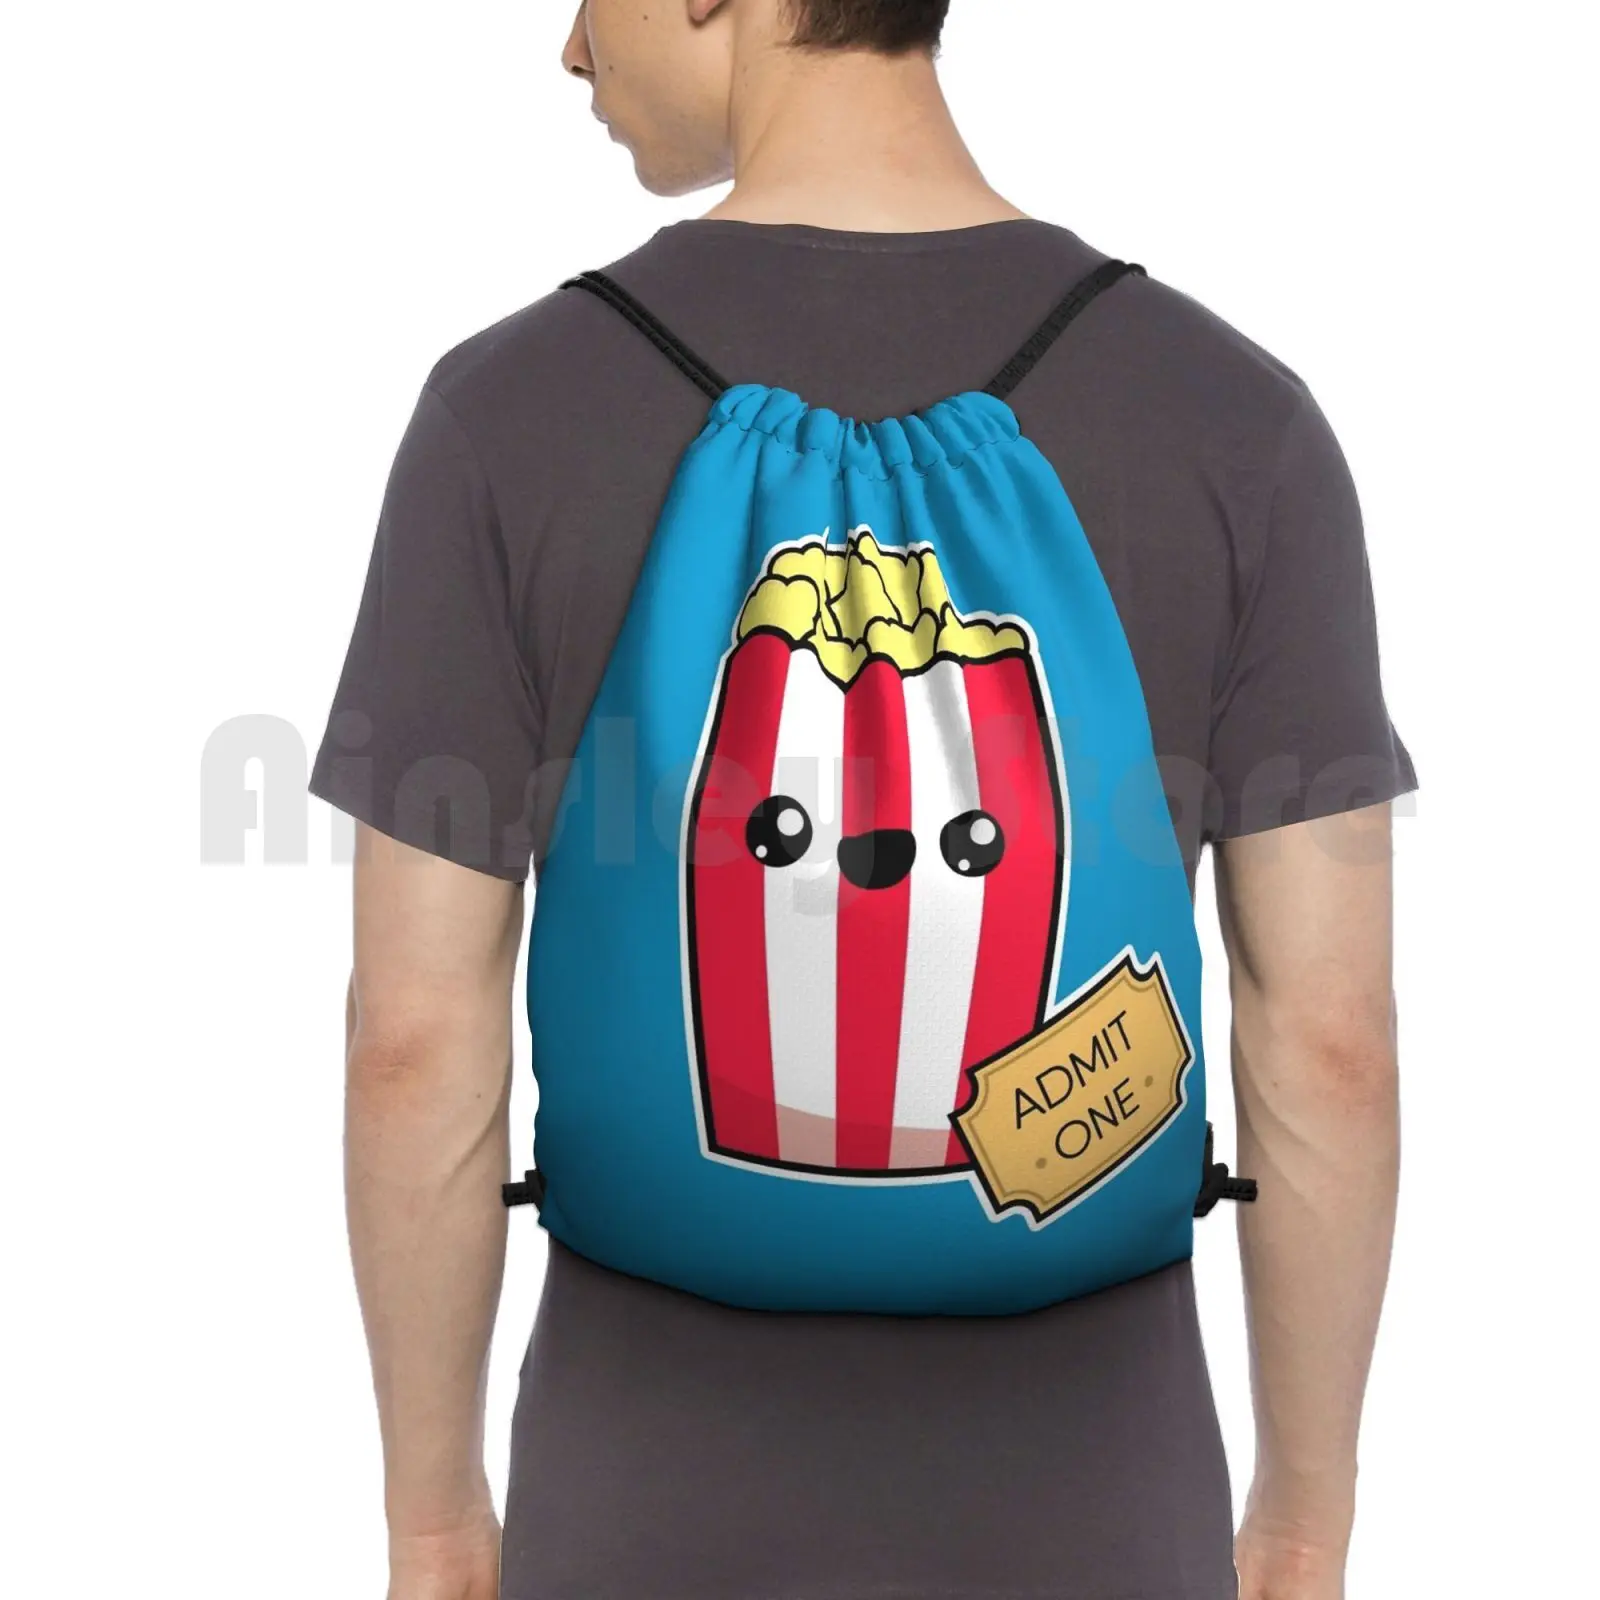 

Movie Night Backpack Drawstring Bag Riding Climbing Gym Bag Movie Theater Popcorn Pop Corn Movies Theaters Food Candies